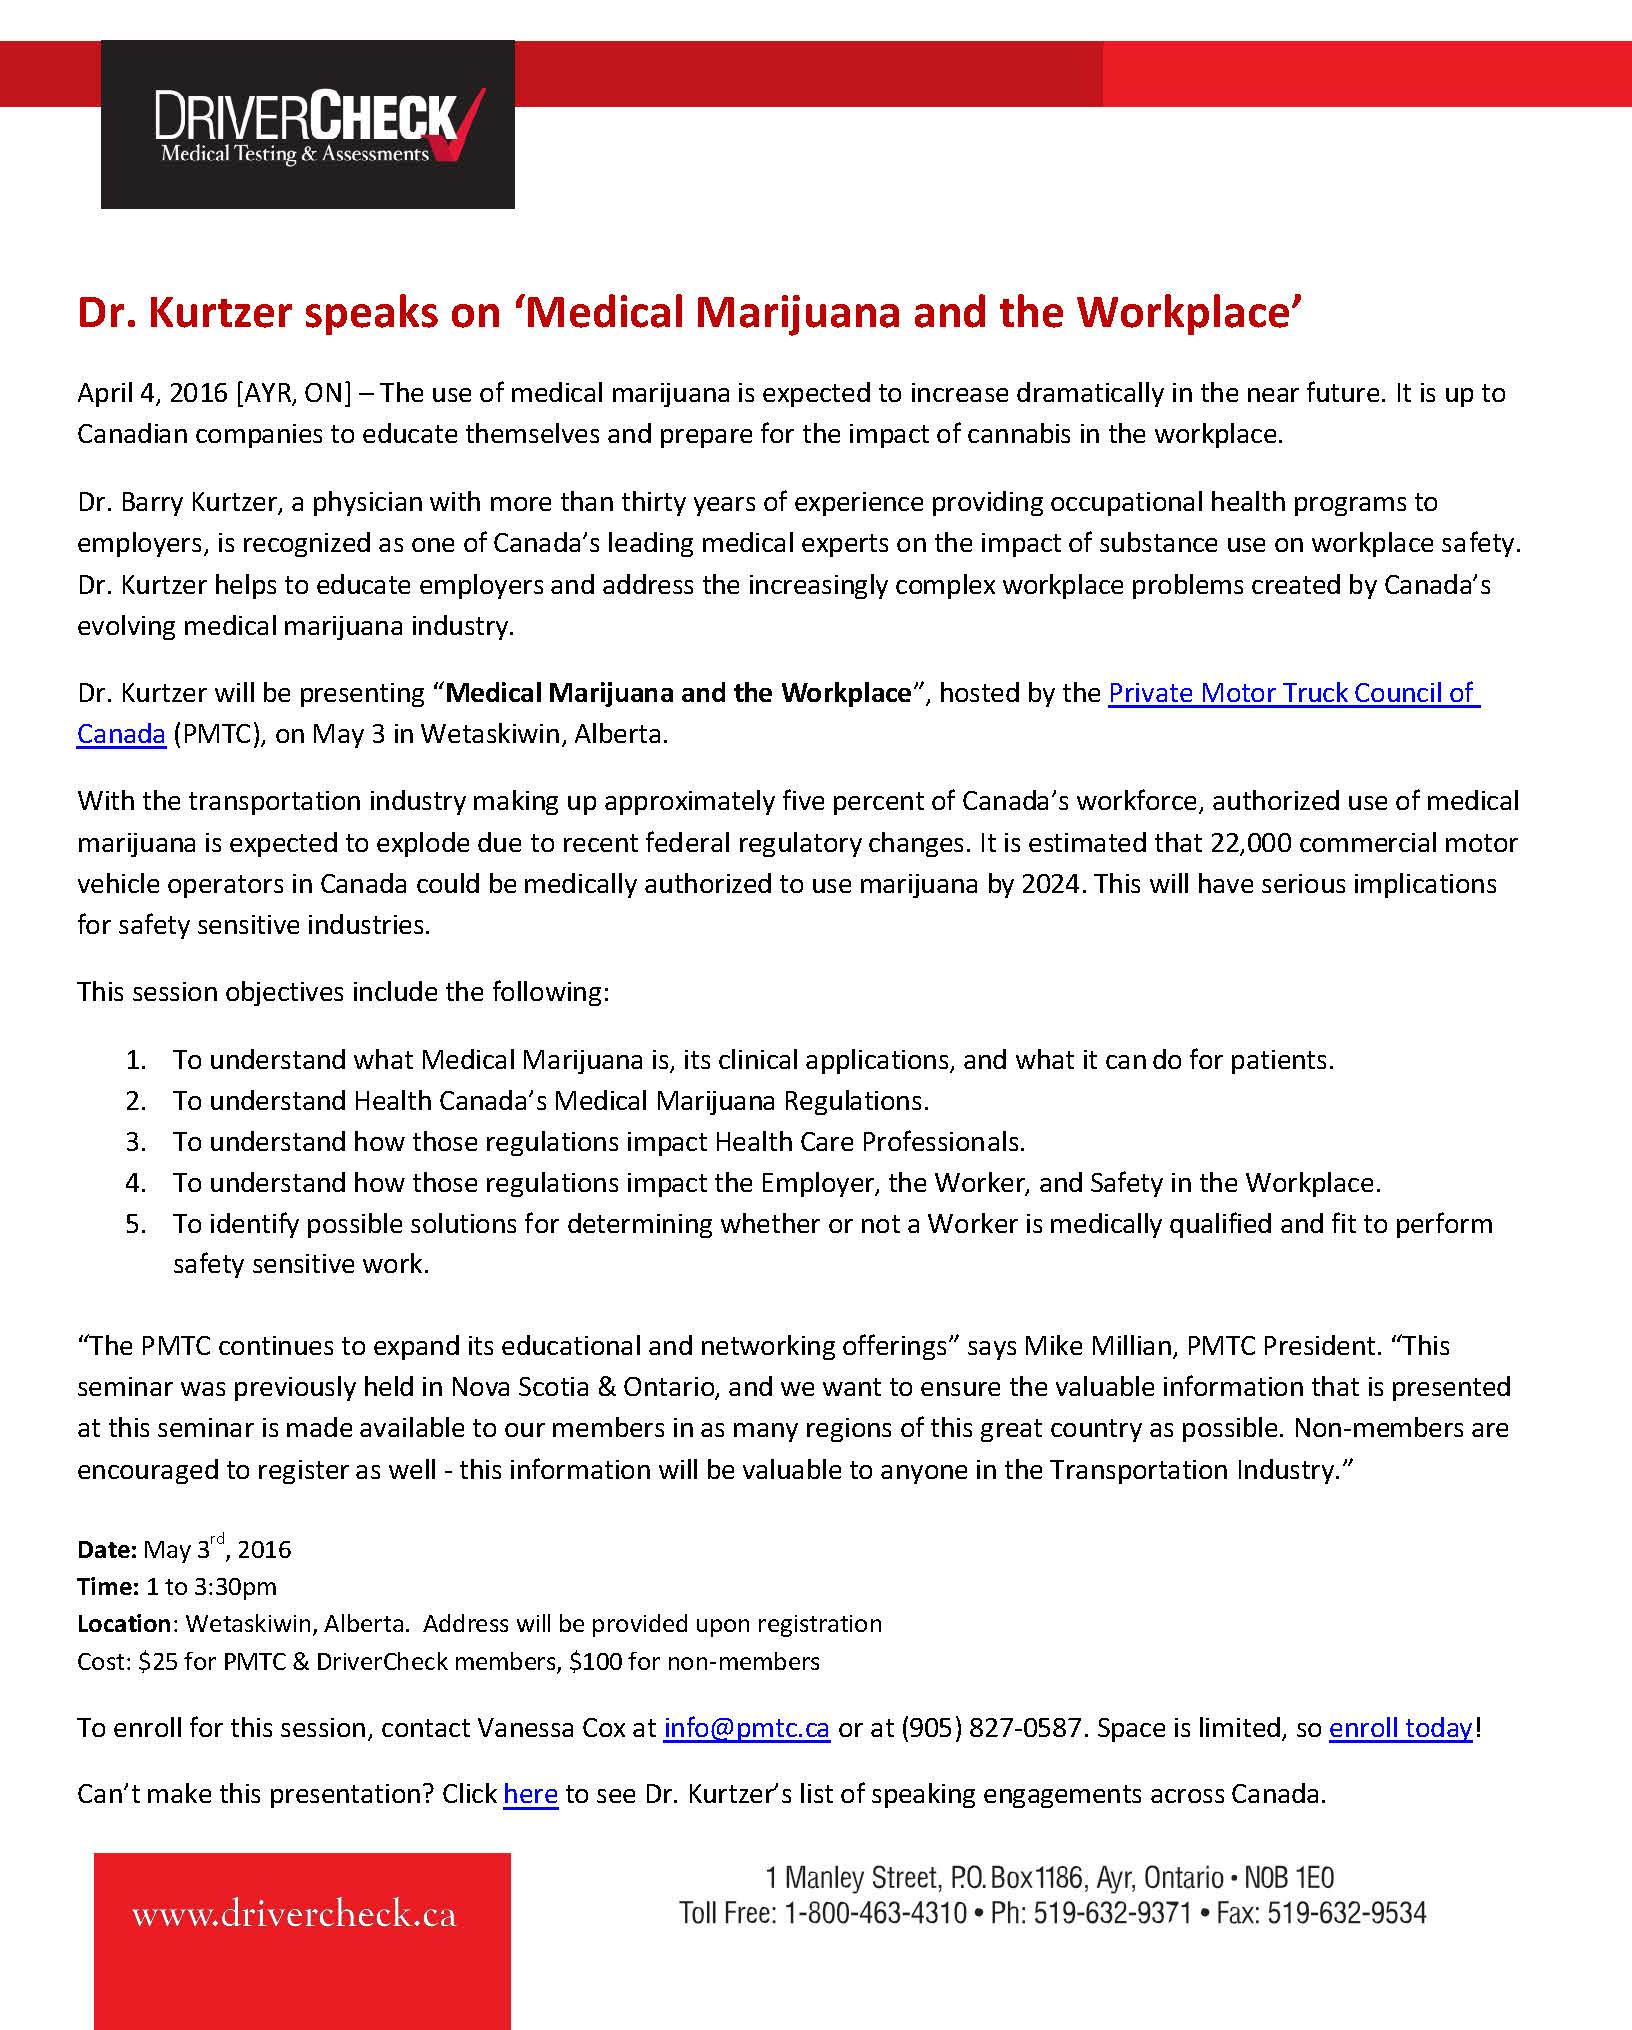 PMTC Hosts Medical Marijuana and the Workplace Seminar_Page_1